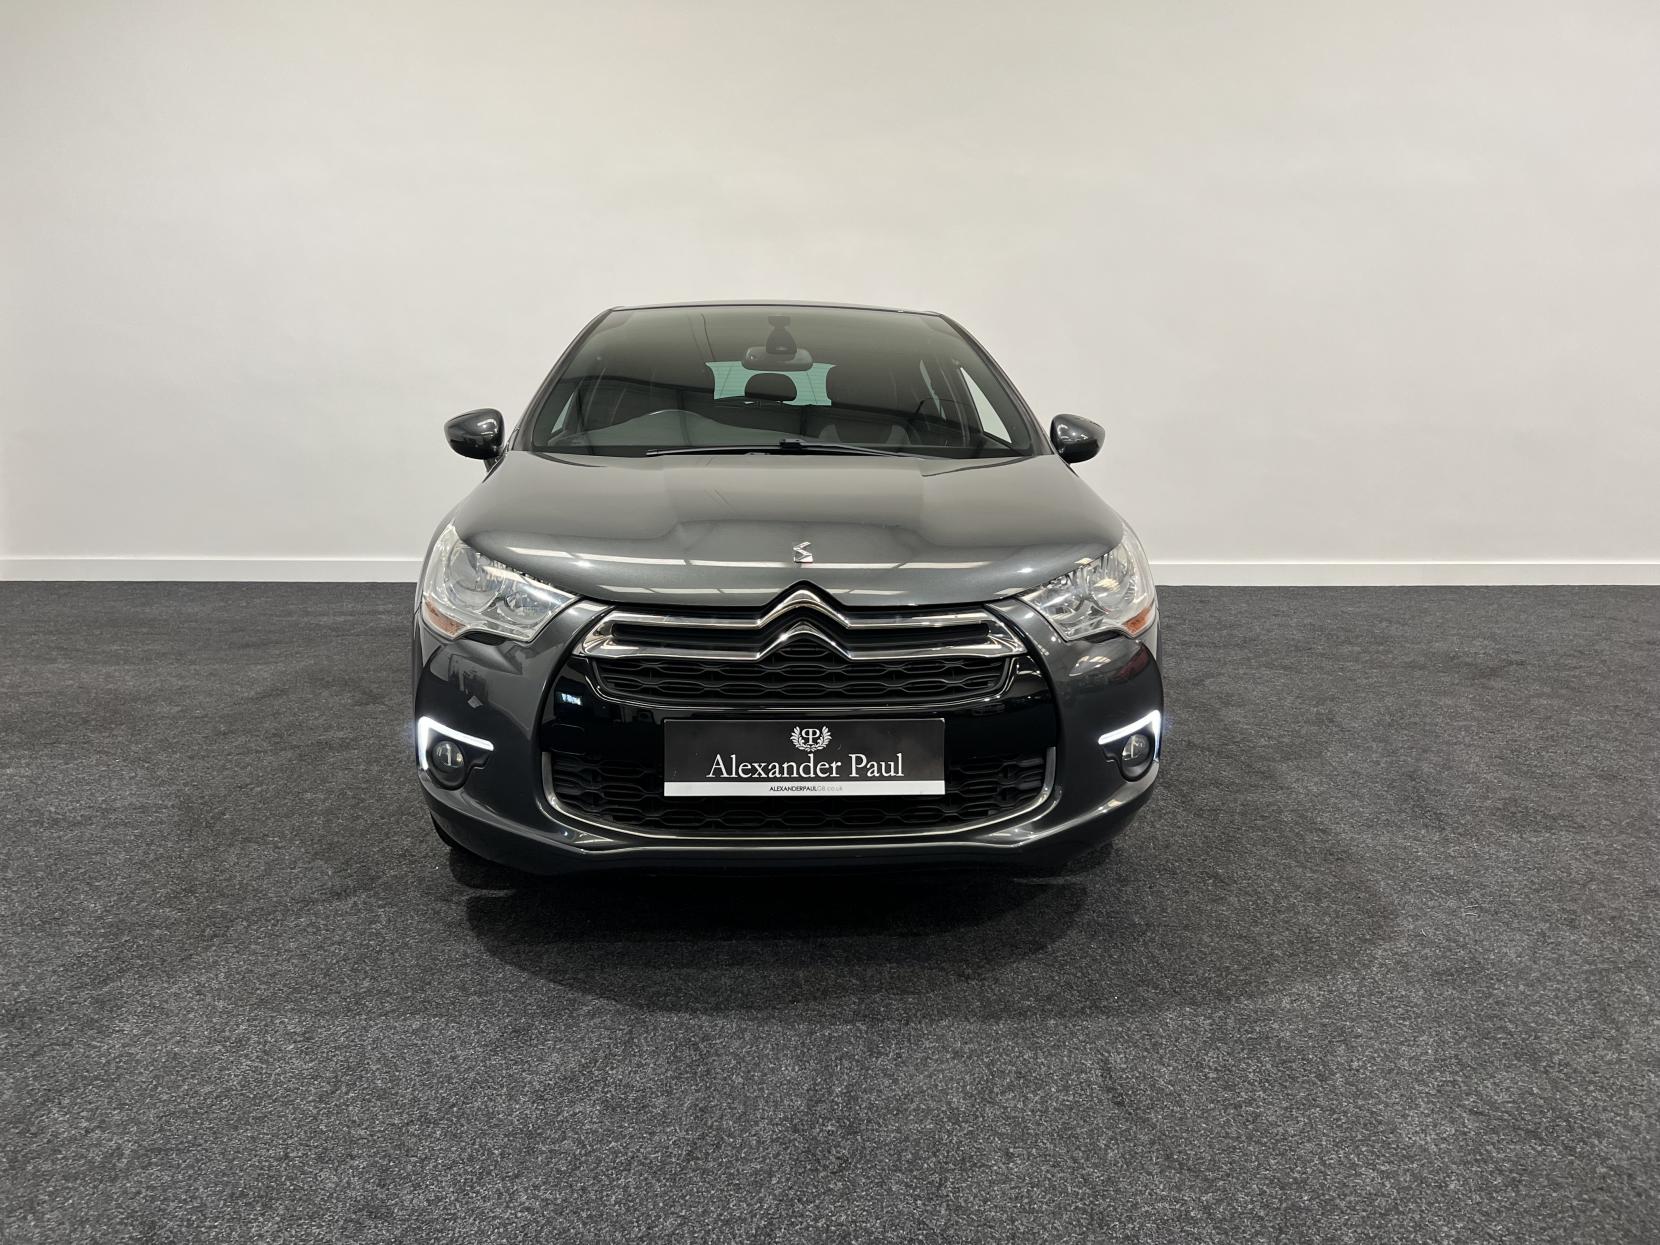 Citroen DS4 1.6 e-HDi Airdream DStyle Hatchback 5dr Diesel EGS6 Euro 5 (s/s) (110 ps)